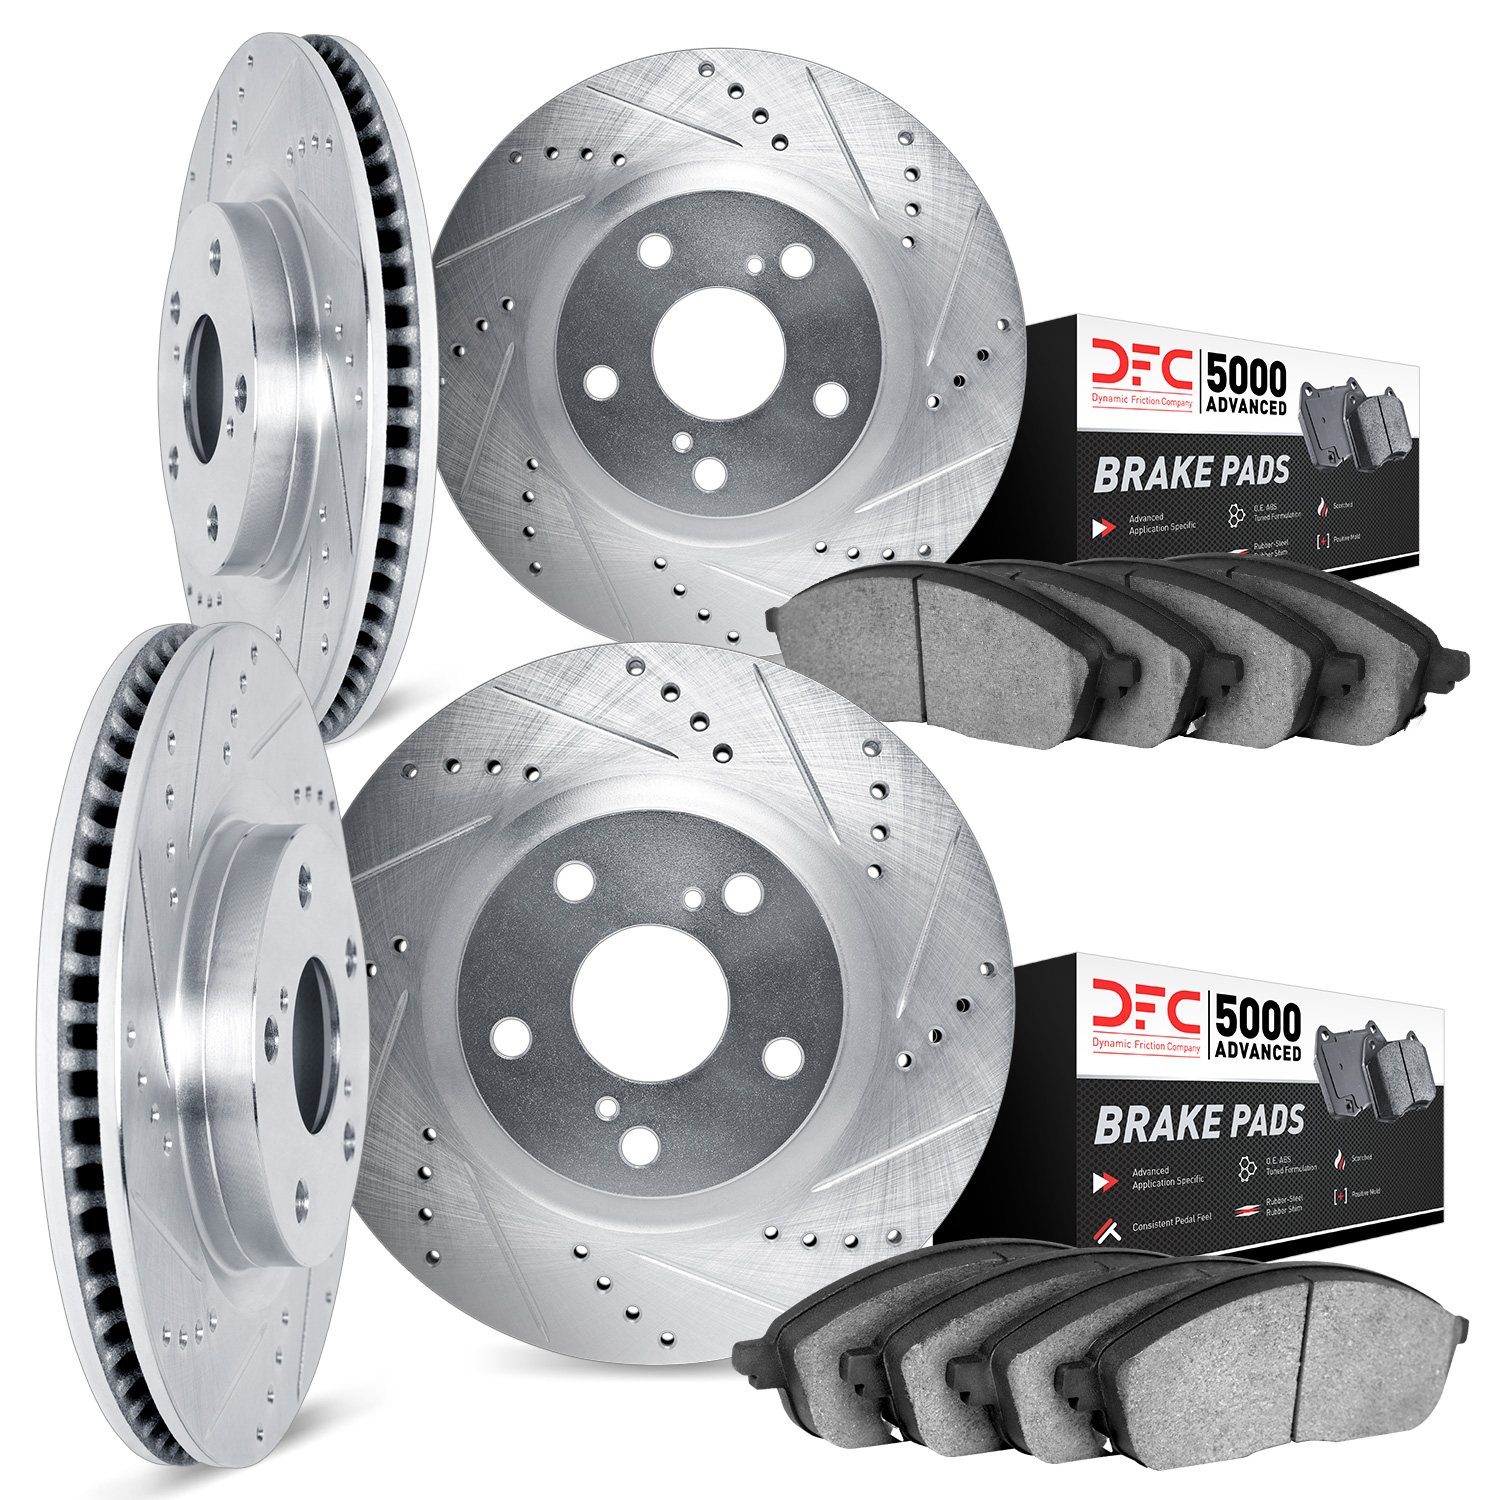 7504-11013 Drilled/Slotted Brake Rotors w/5000 Advanced Brake Pads Kit [Silver], 2010-2012 Land Rover, Position: Front and Rear